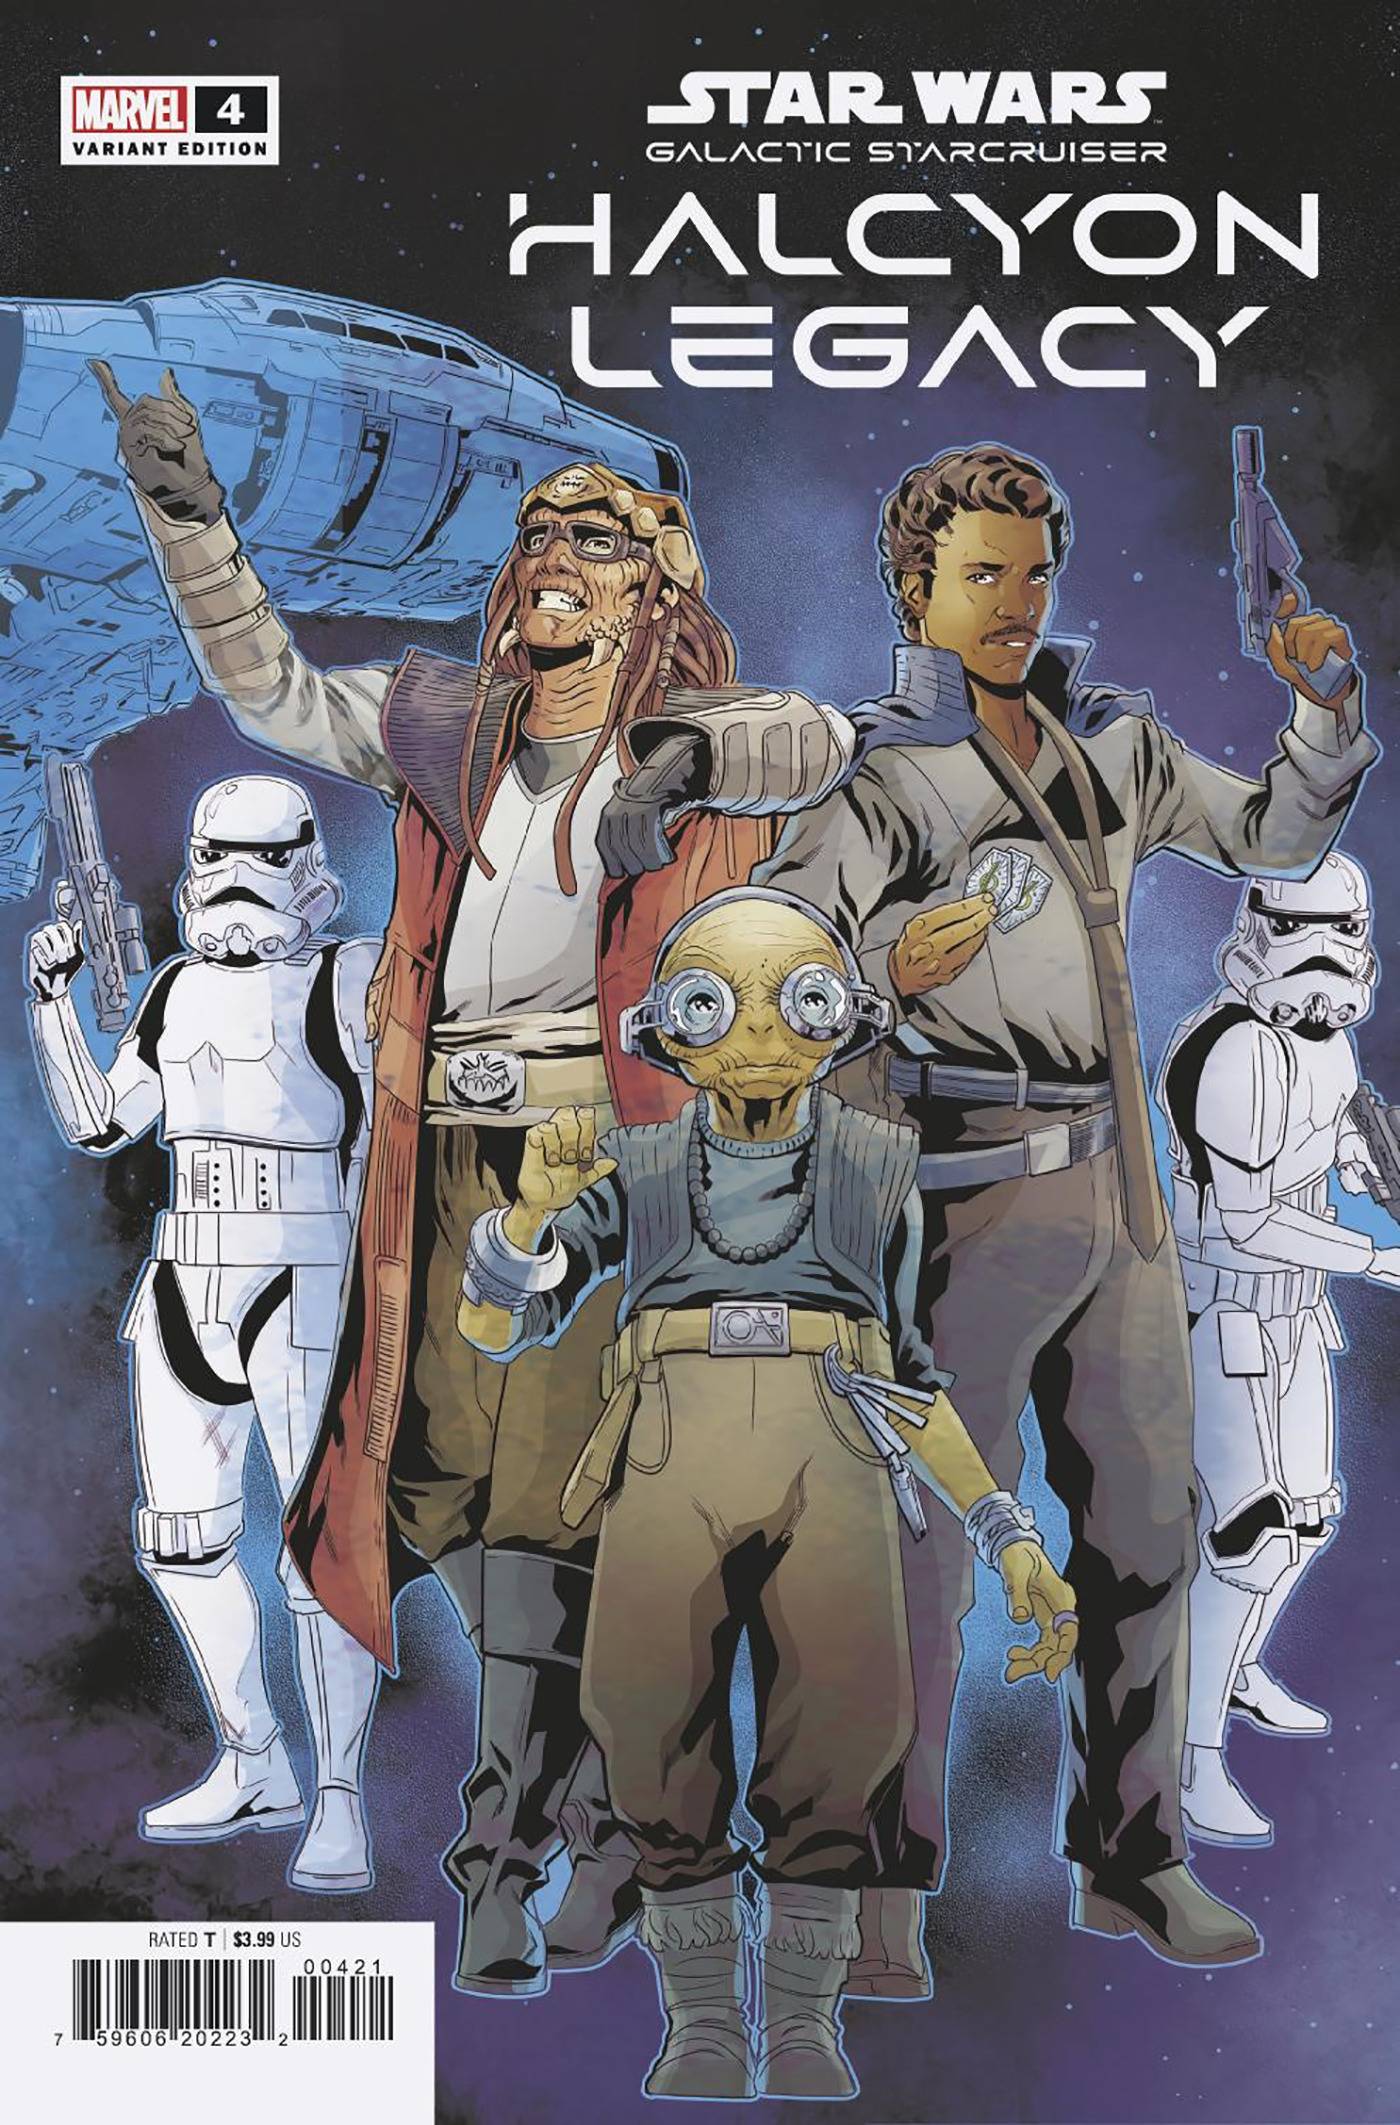 STAR WARS HALCYON LEGACY #4 (OF 5) SLINEY CONNECTING VAR